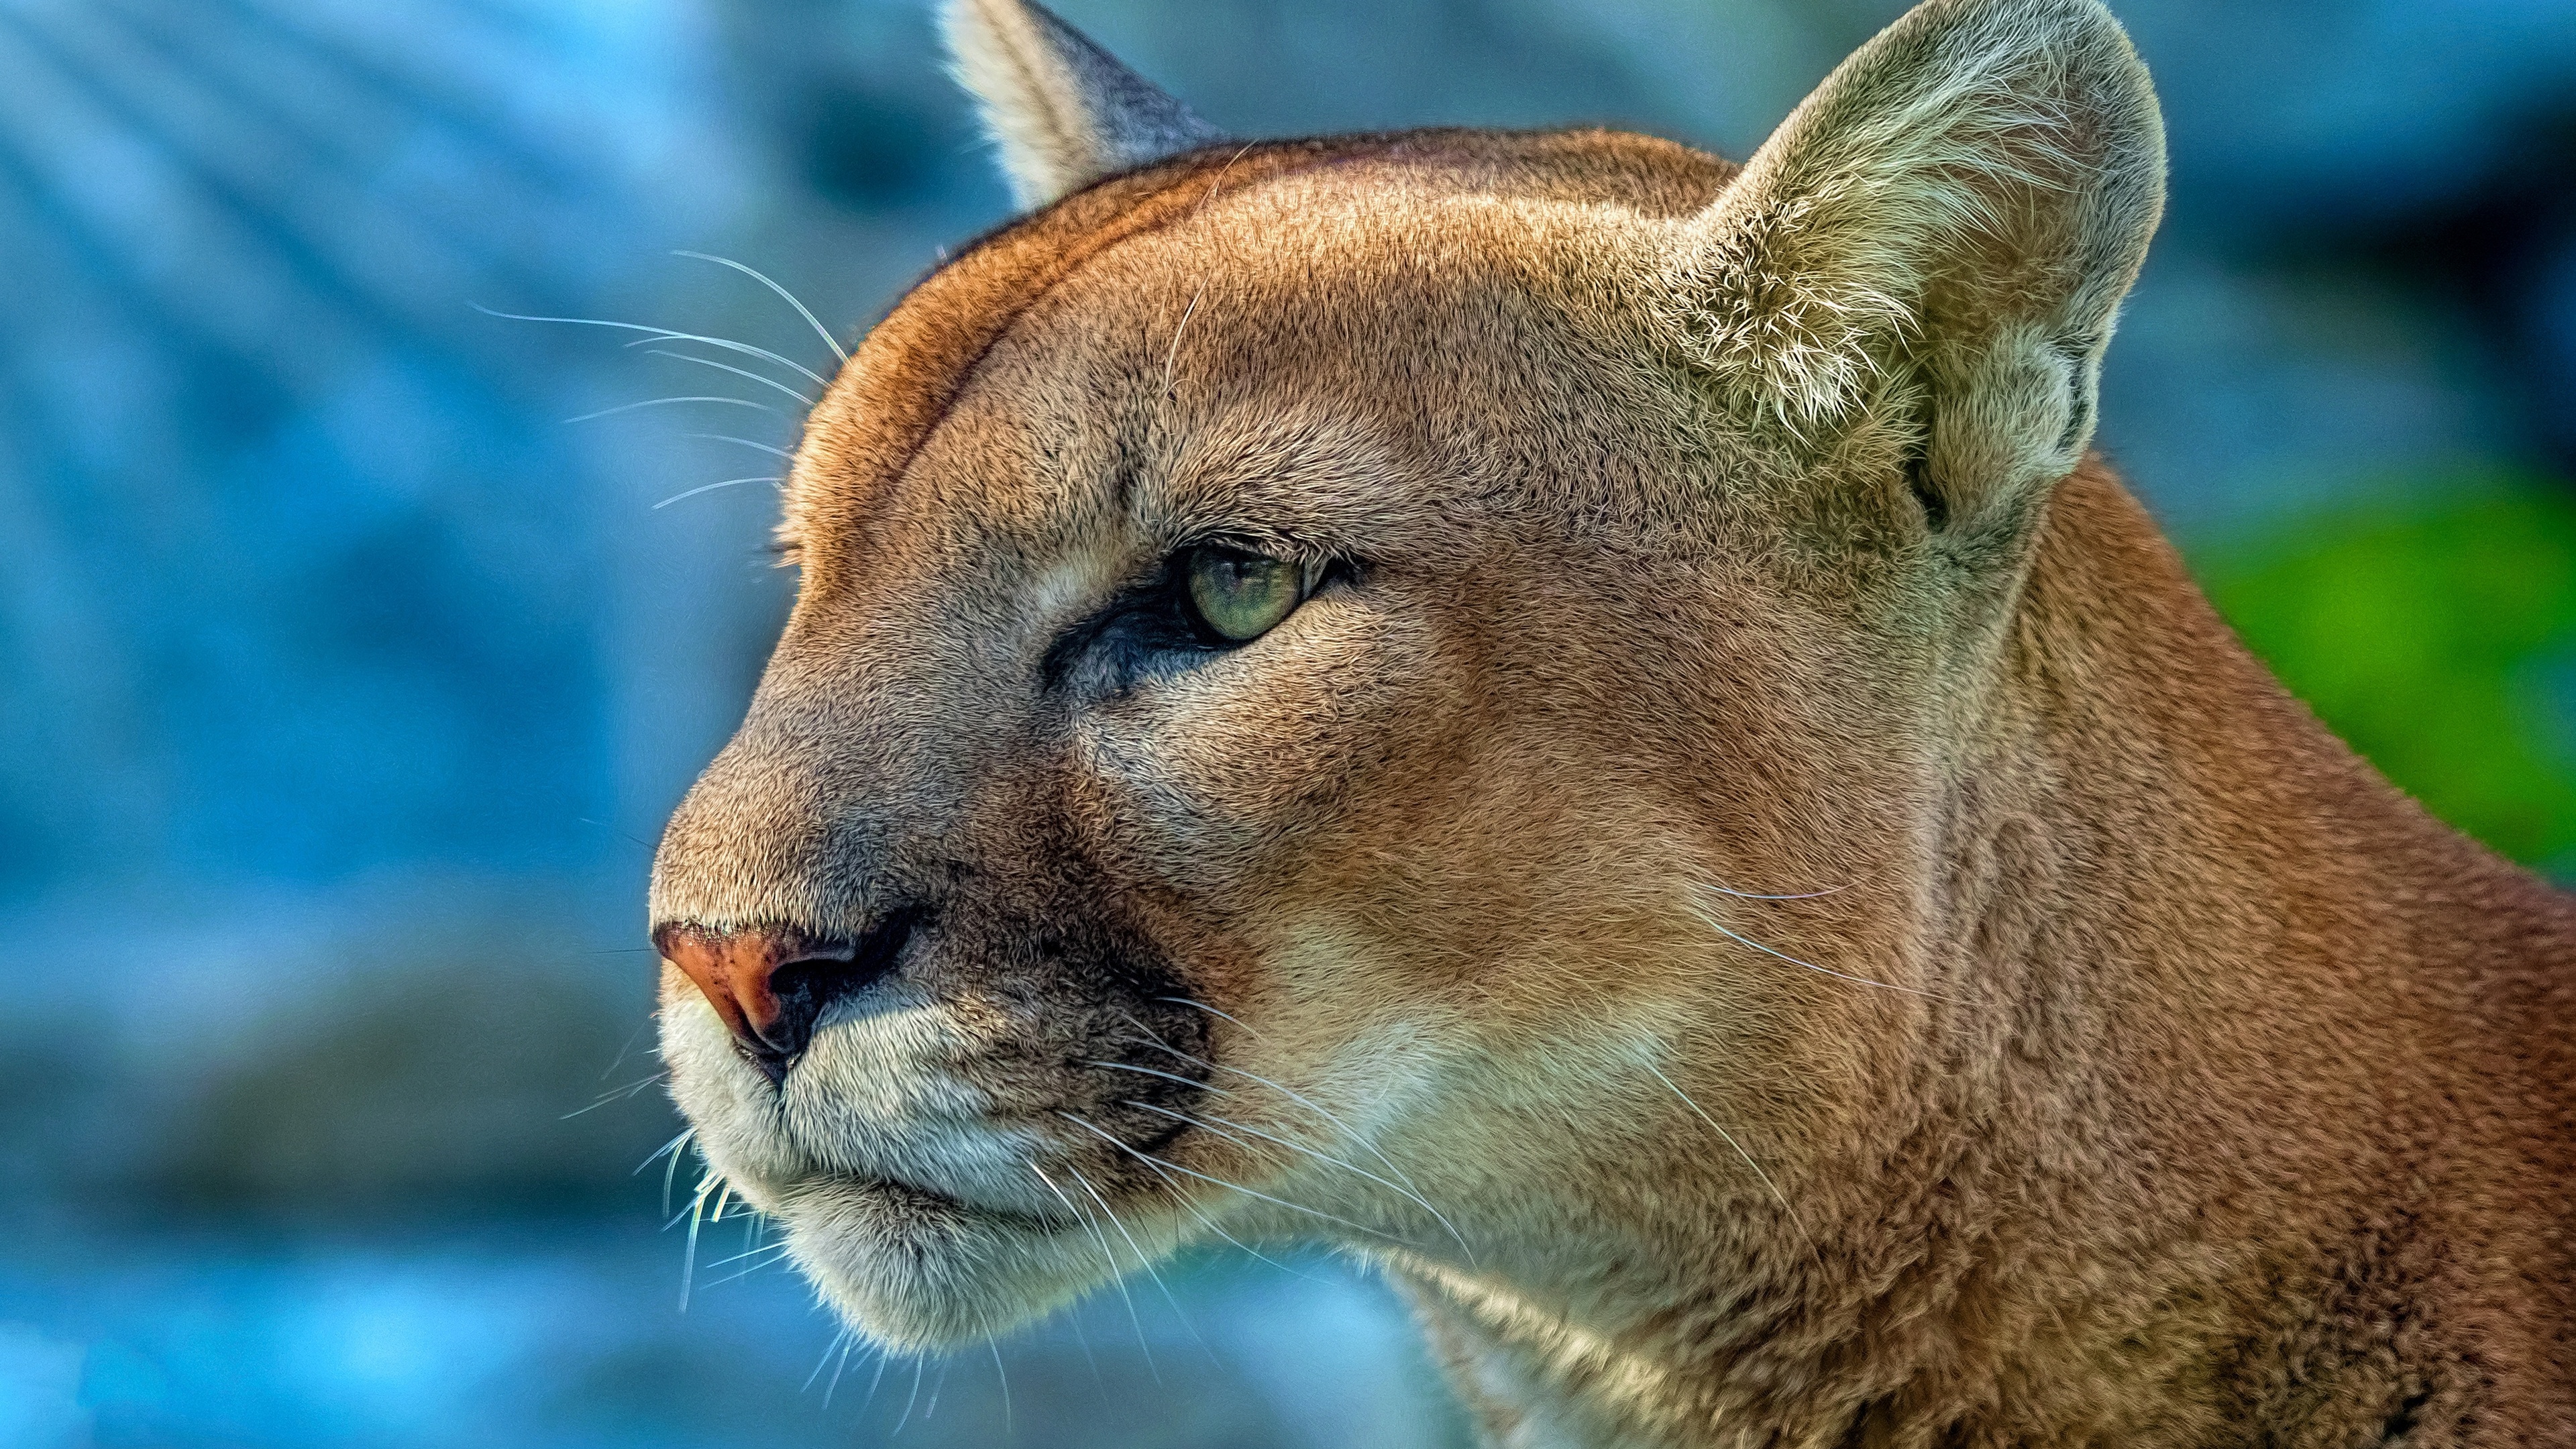 Cougar Wallpaper On The Desktop Background A Picture Of A Mountain Lion  Background Image And Wallpaper for Free Download